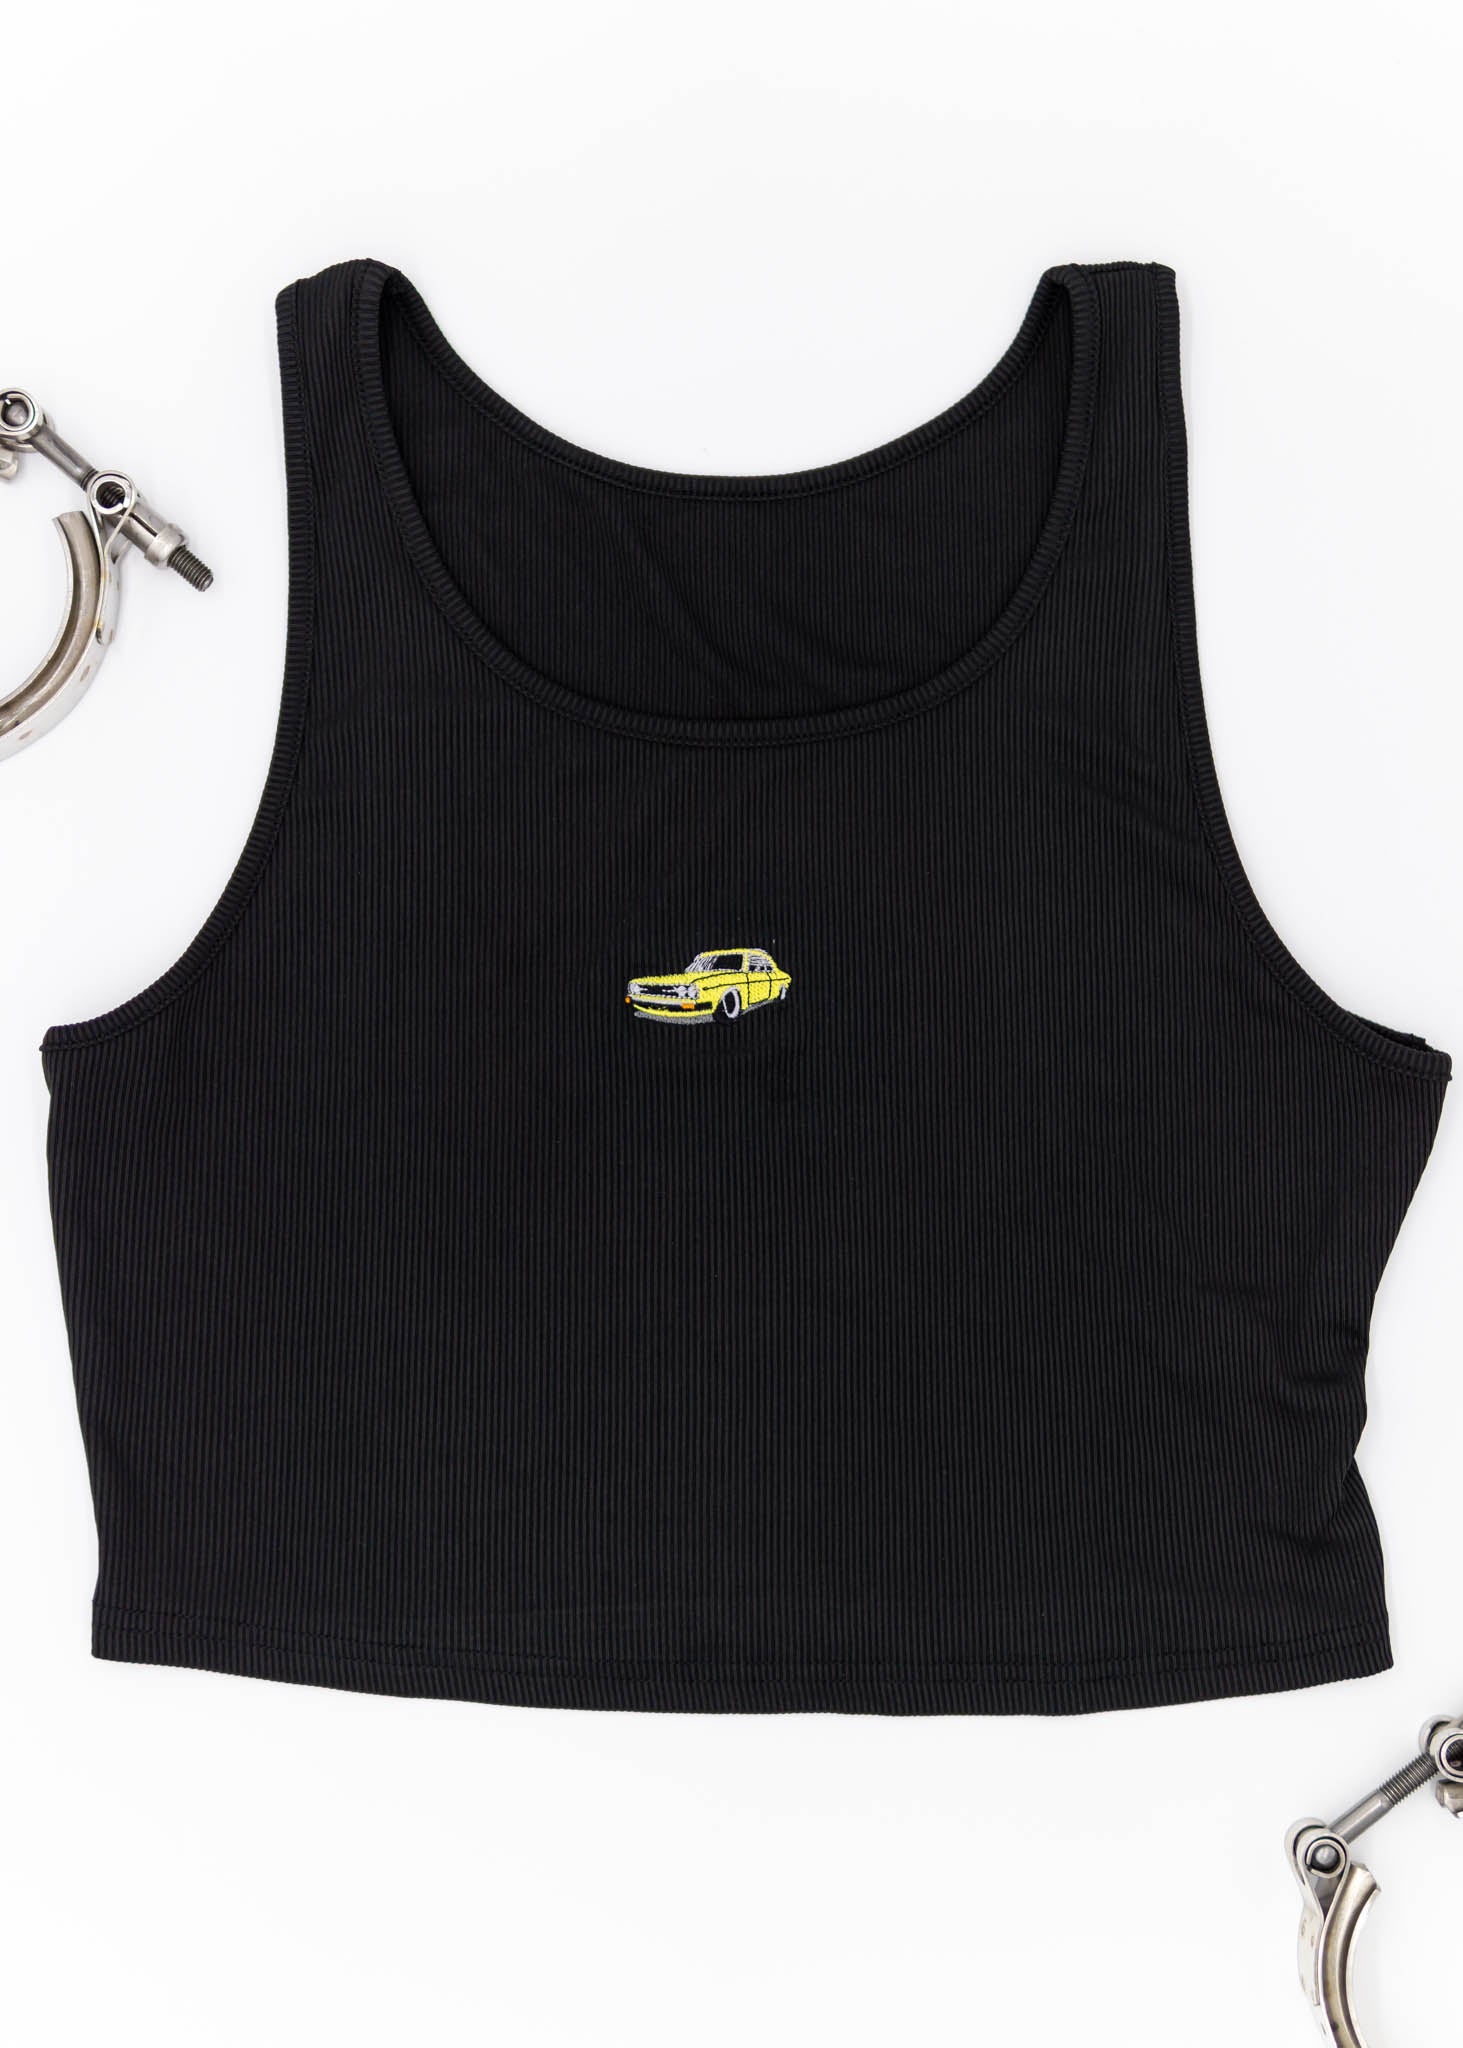 A black Audi crop top for plus sized women. Photo is the front view of the top with an embroidered yellow Audi 100LS. Fabric composition is polyester, and elastine. The material is stretchy, ribbed, and non-transparent. The style of this shirt is sleeveless, with a round neckline.